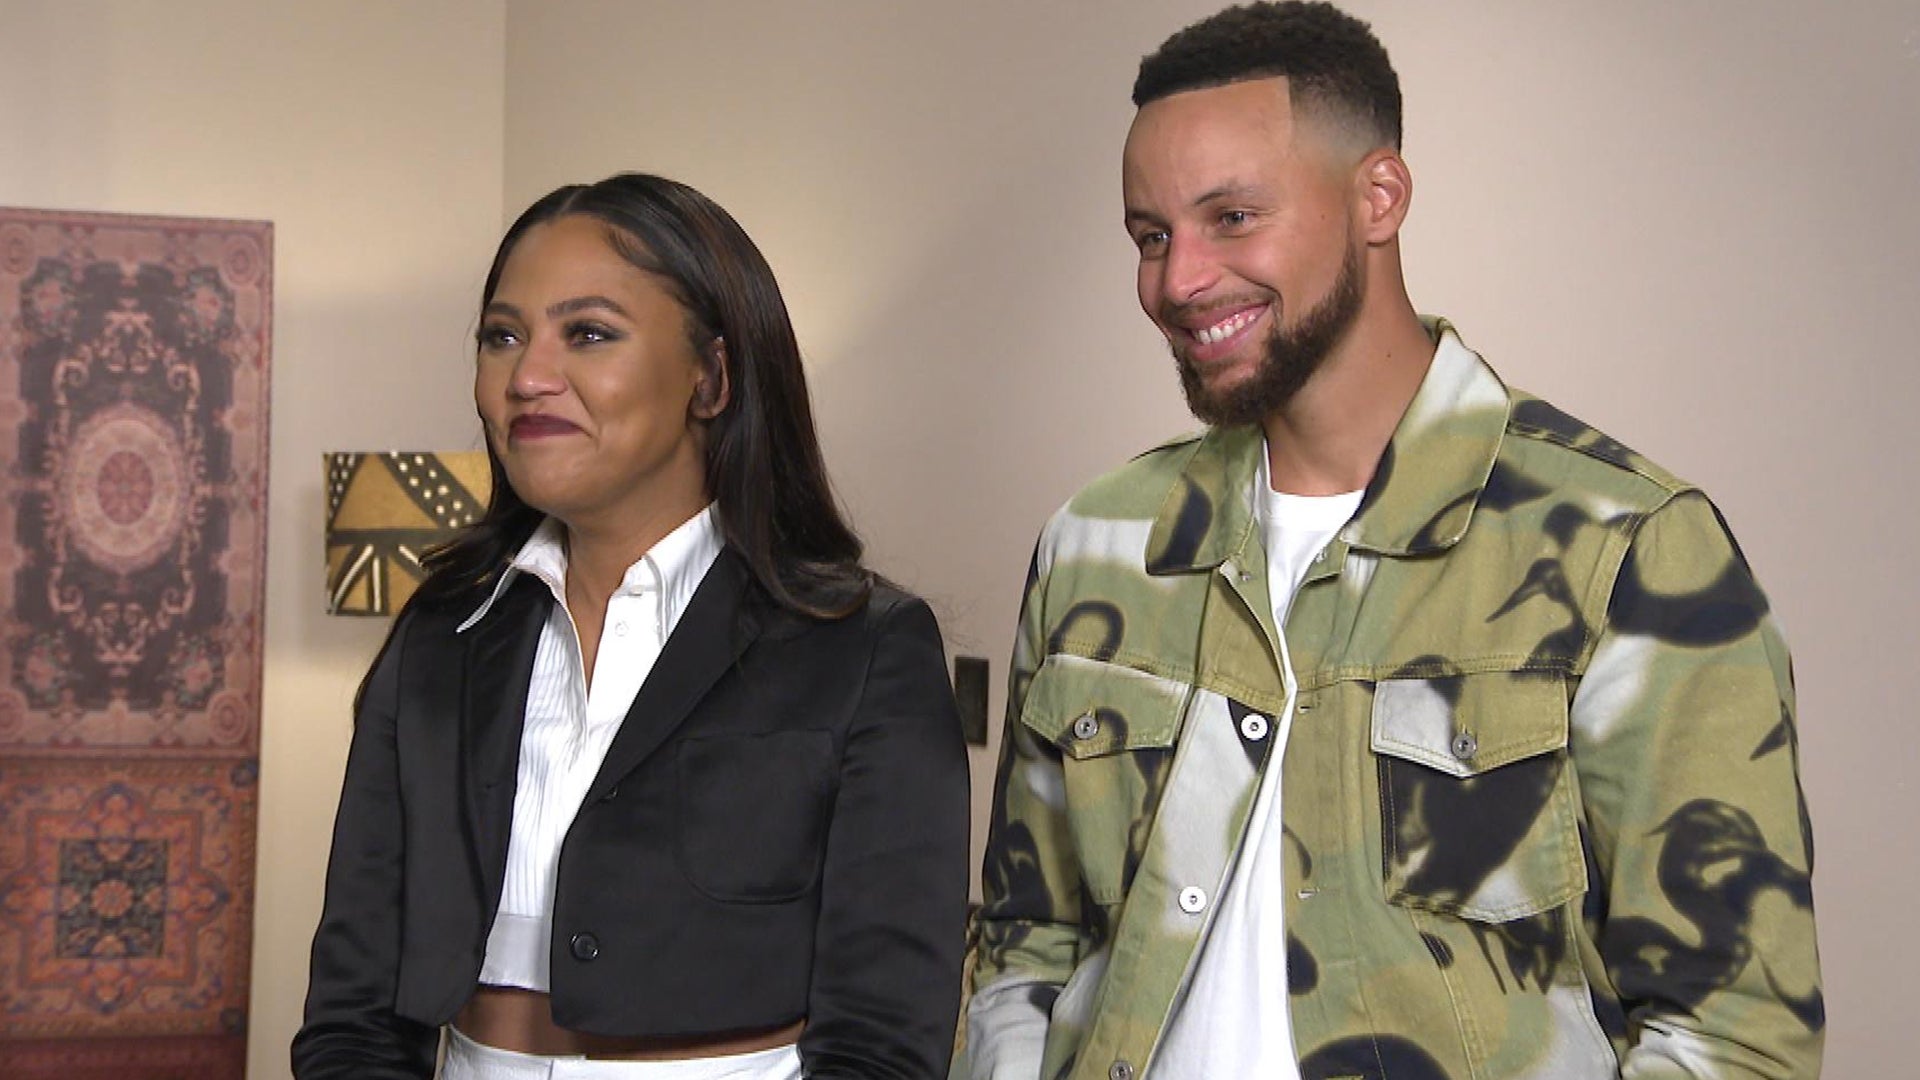 Steph Curry Defends Wife Ayesha Against 'Meanies' After She